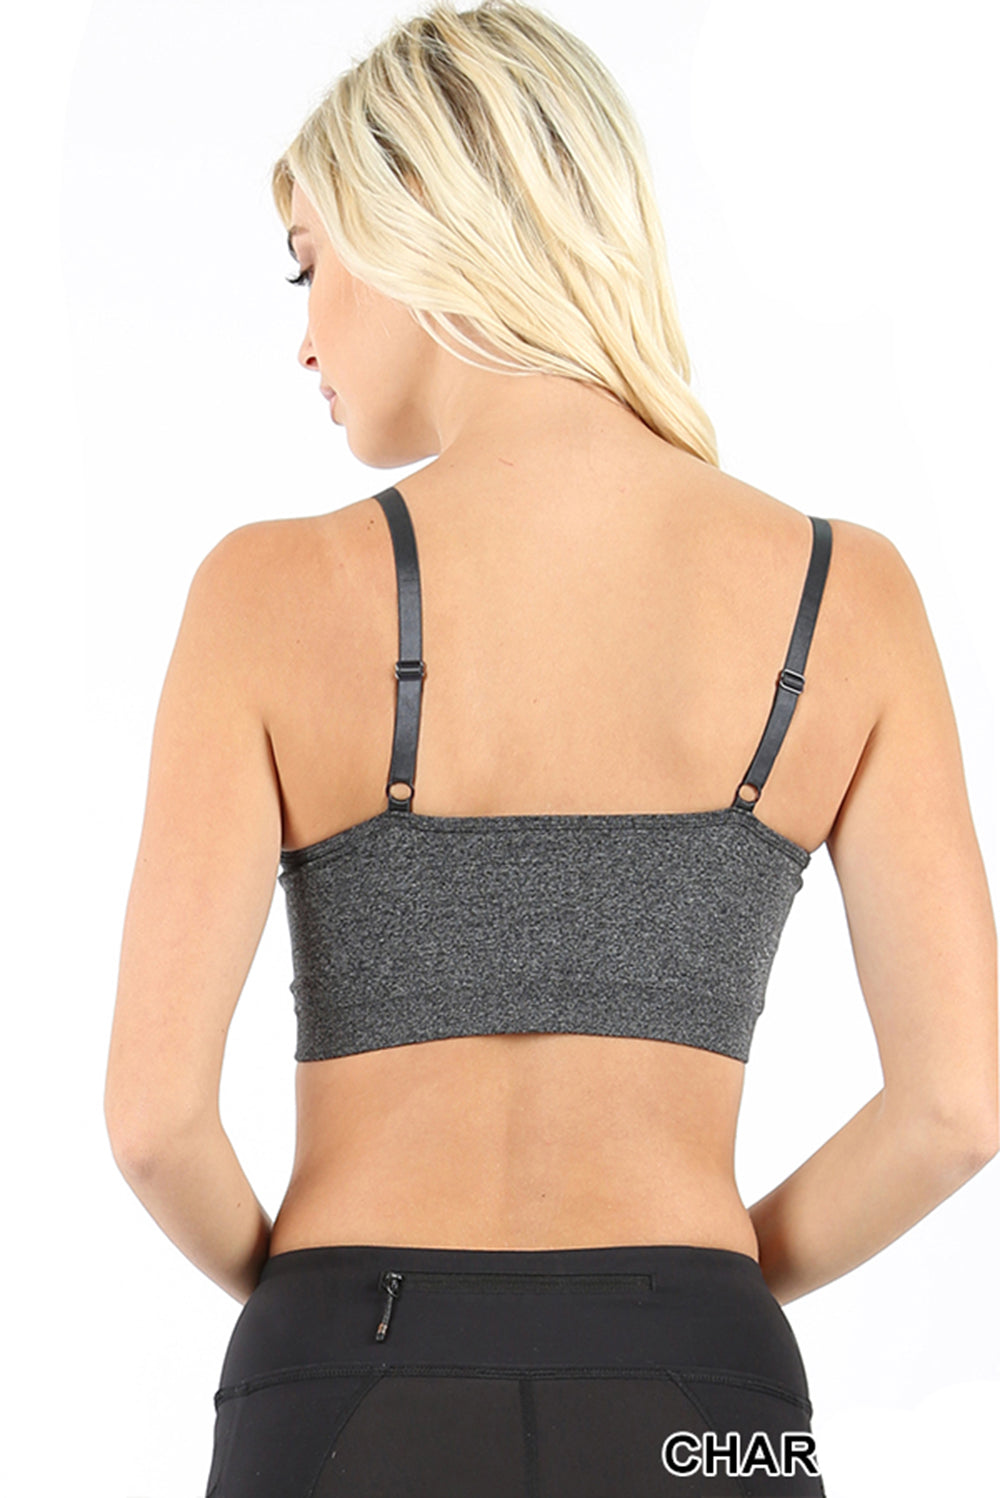 Sexy Cross Straps Seamless Crop Camisole Style Sports Bra with Removable Pads for Women … - Shop Lev